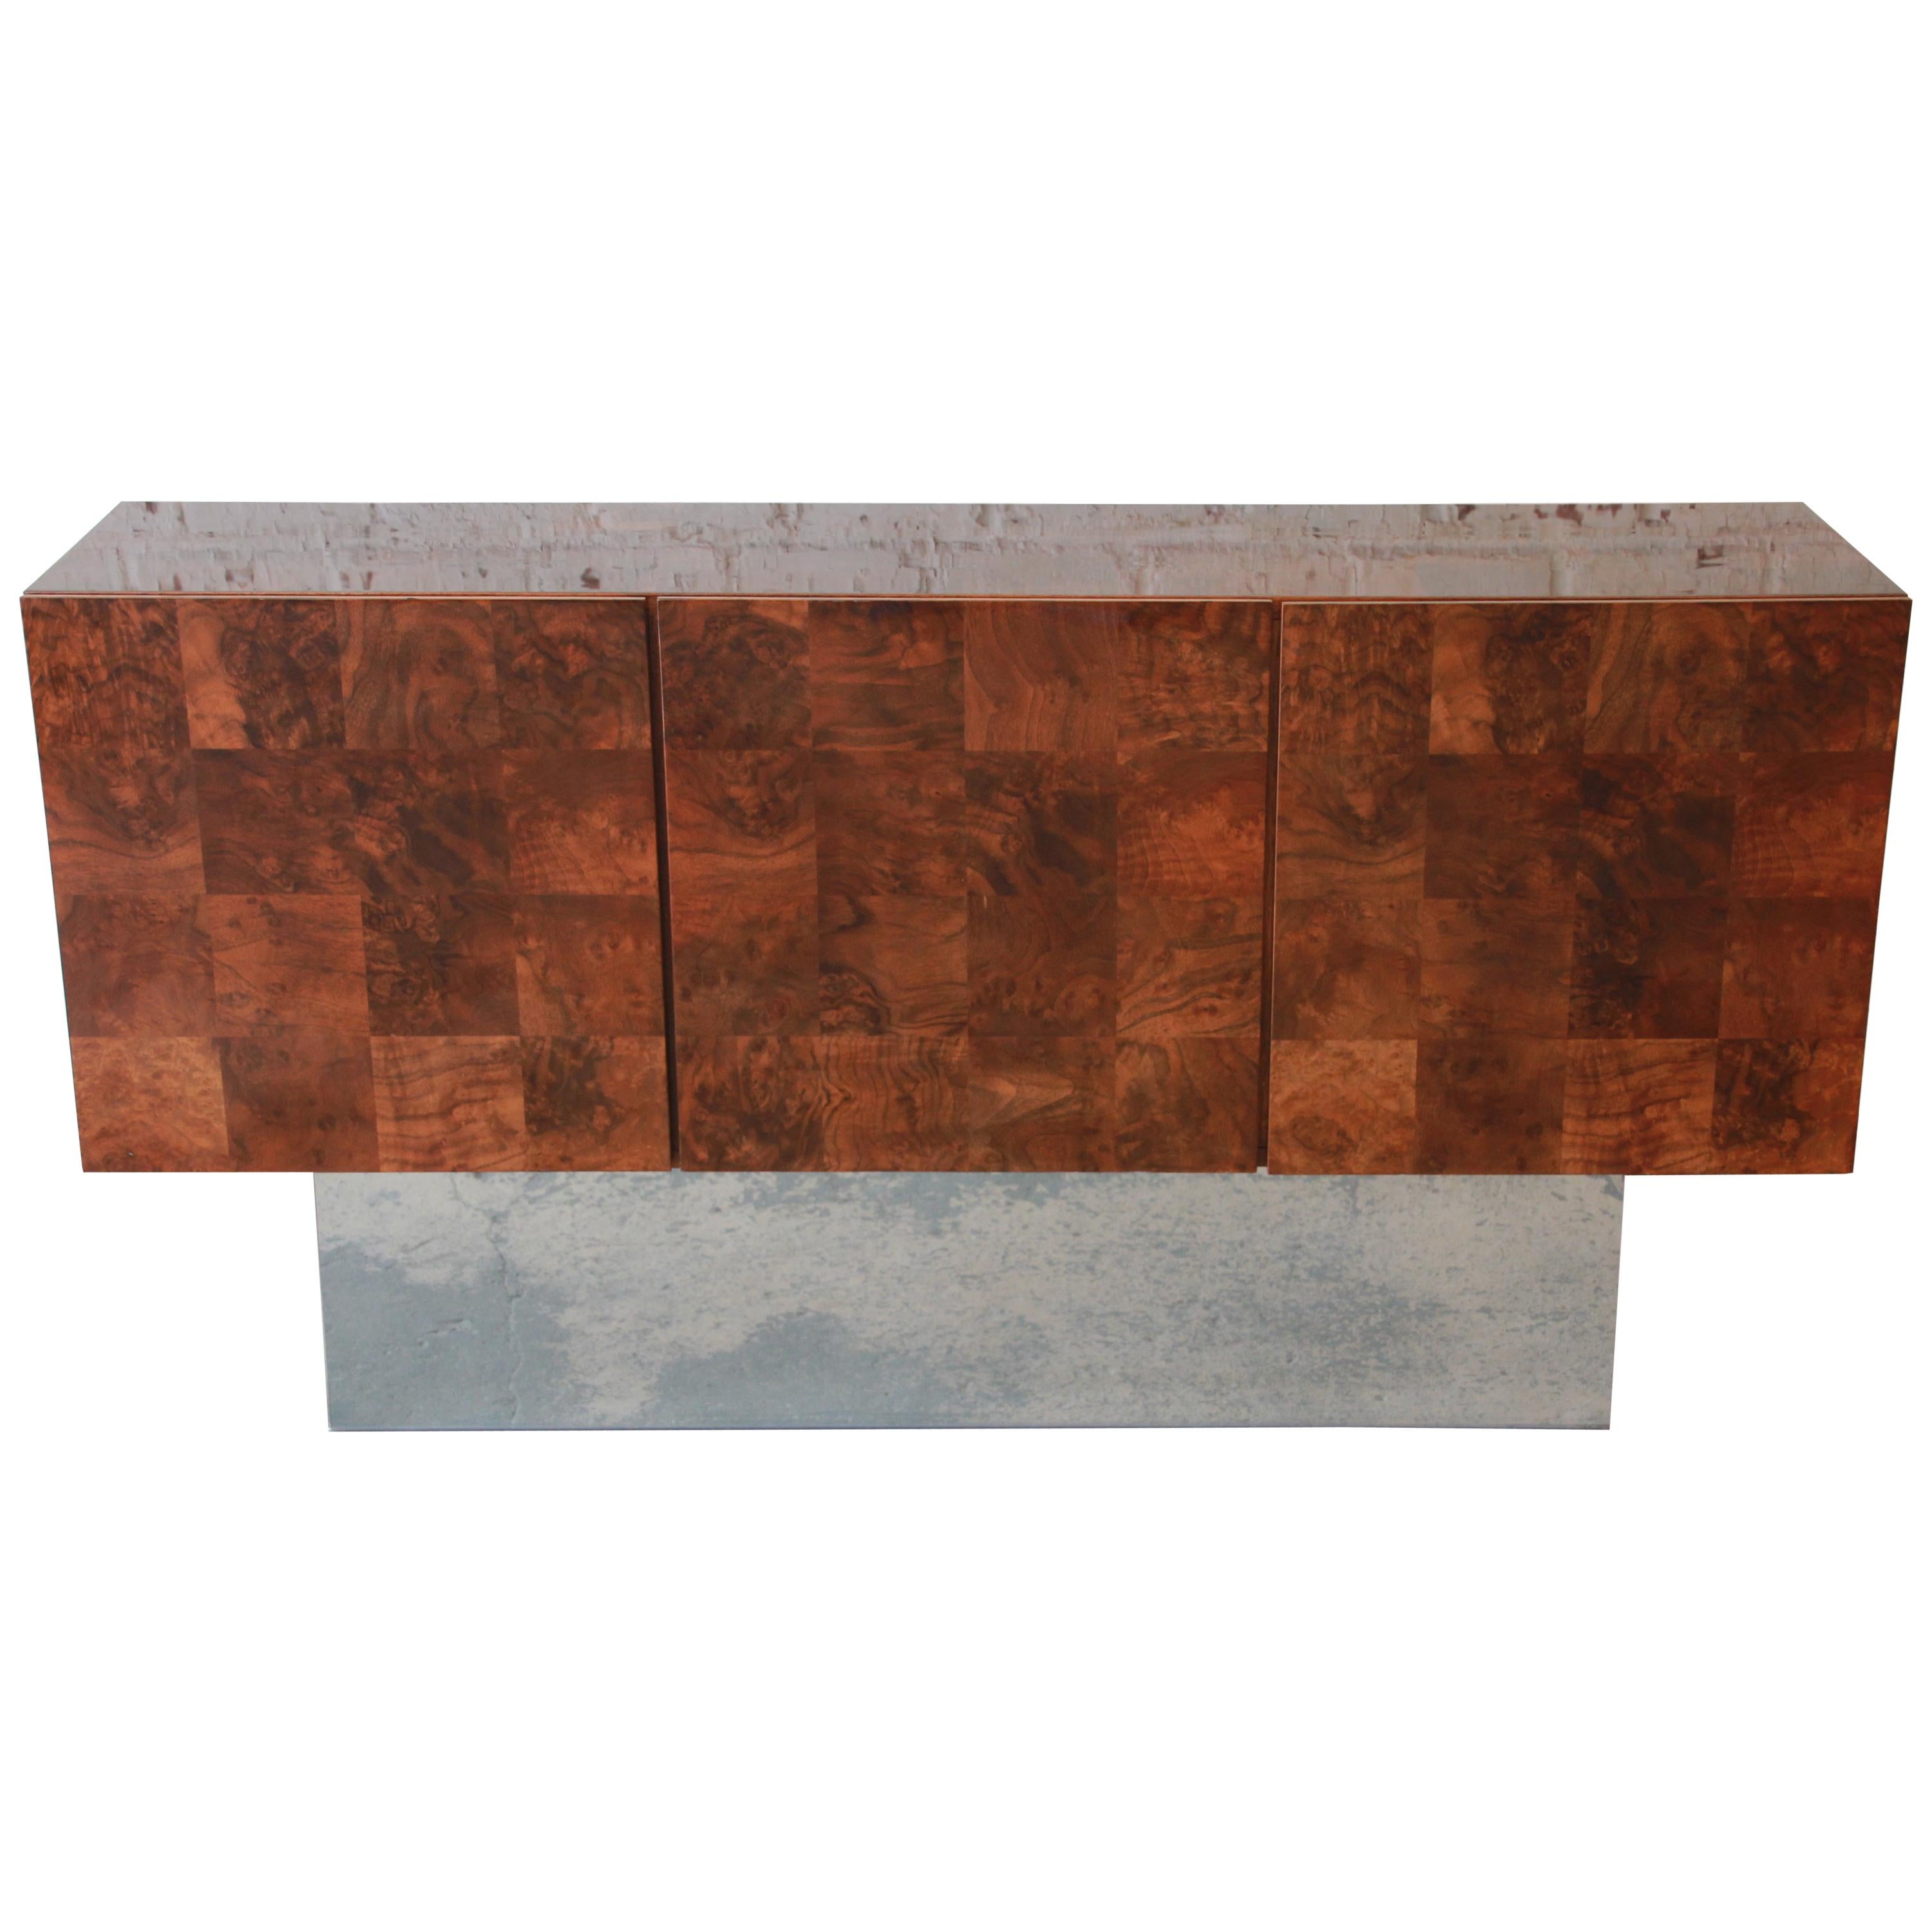 Milo Baughman Patchwork Burl Wood and Chrome Sideboard Credenza